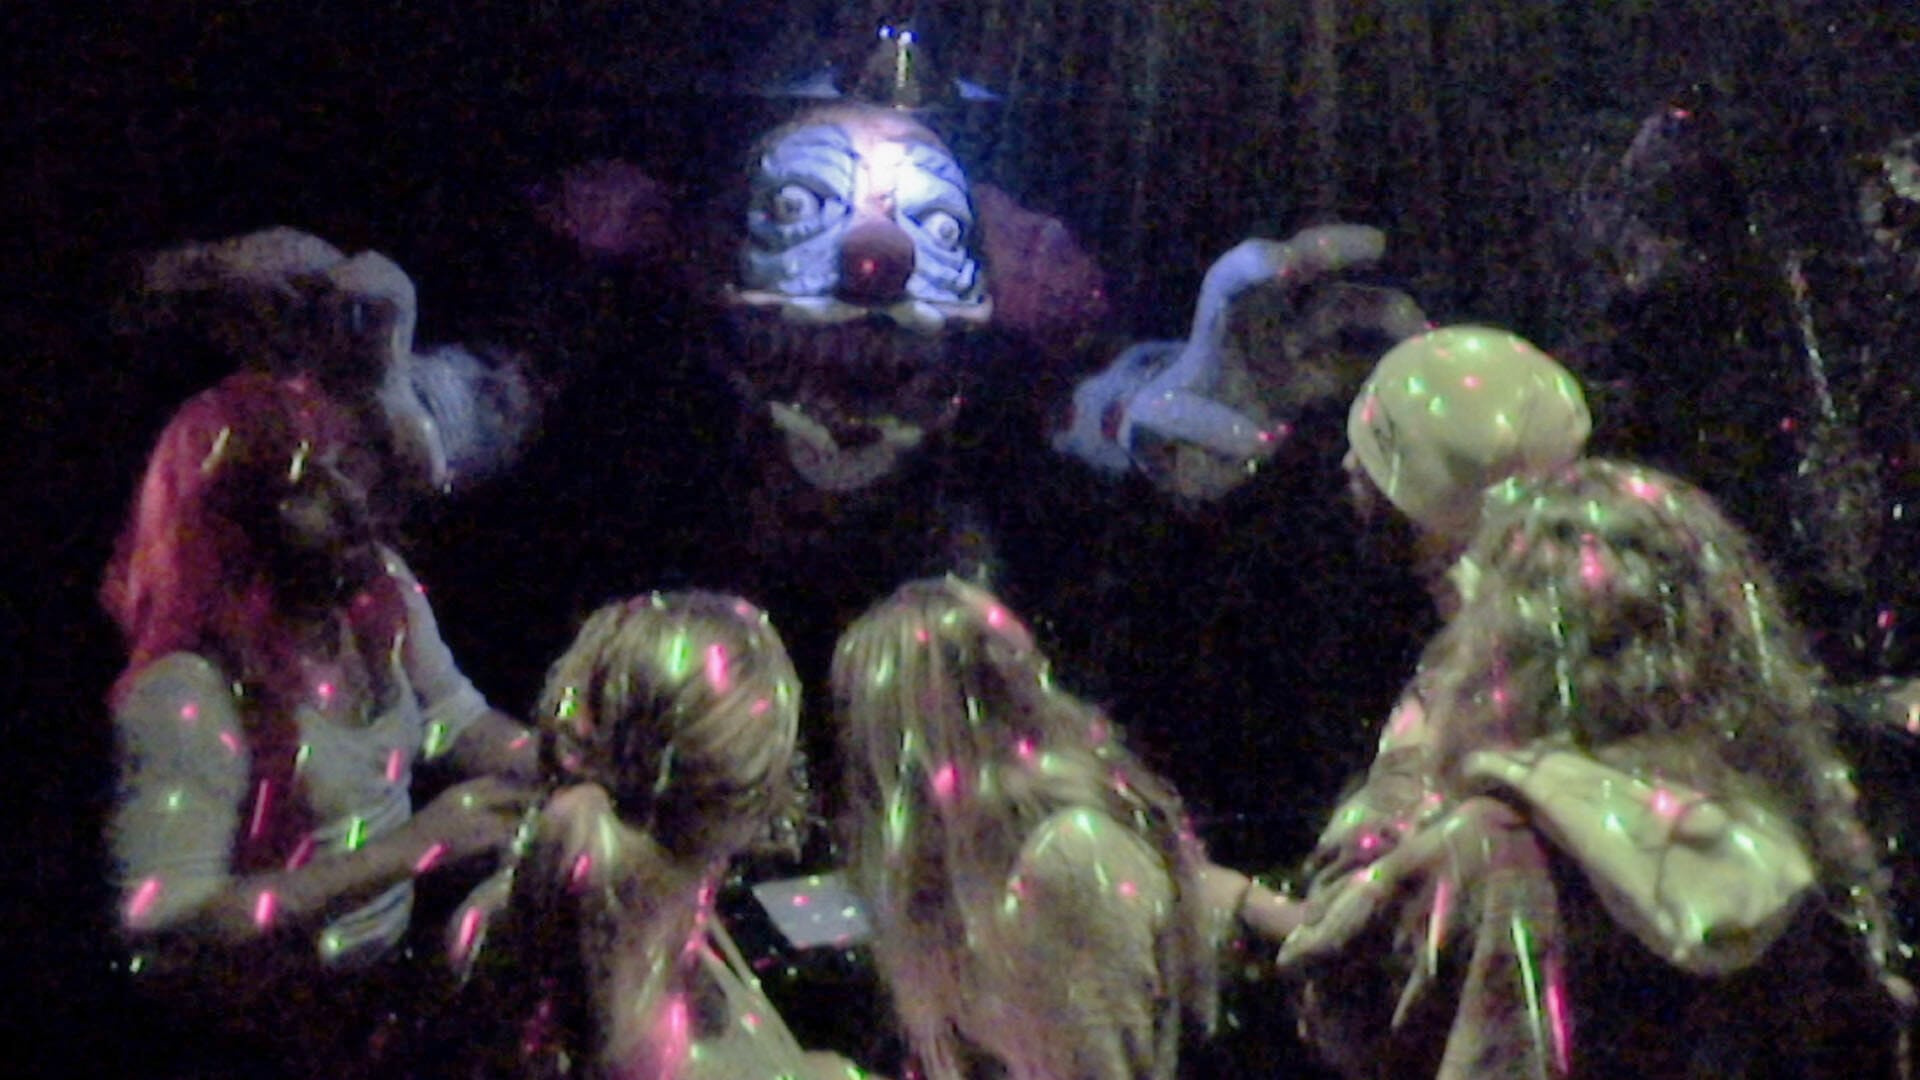 A group of people standing around a clown in a dark room.